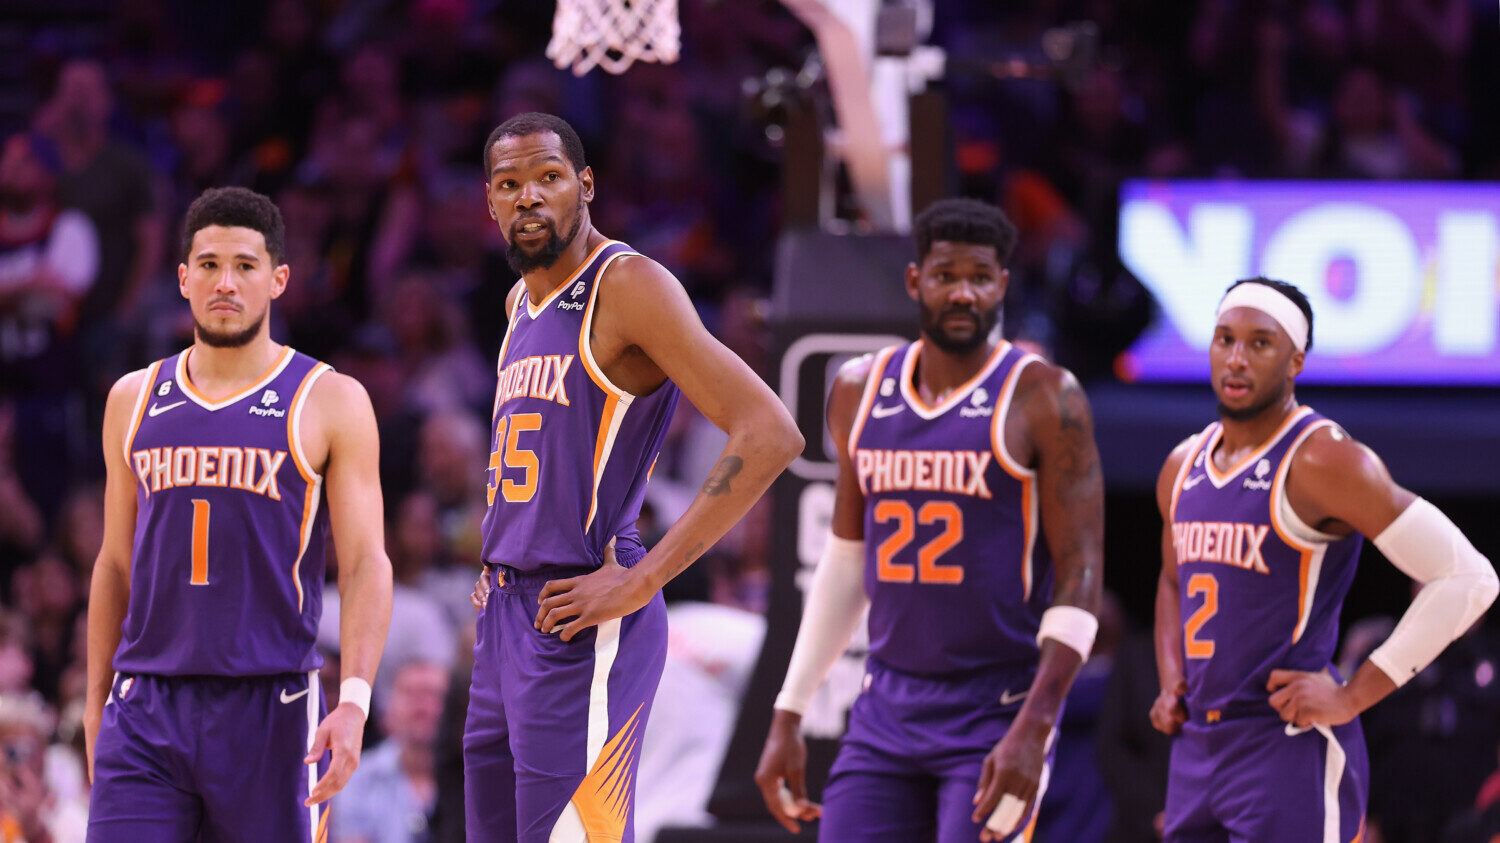 Suns roster: what contract do they have and what is the salary of